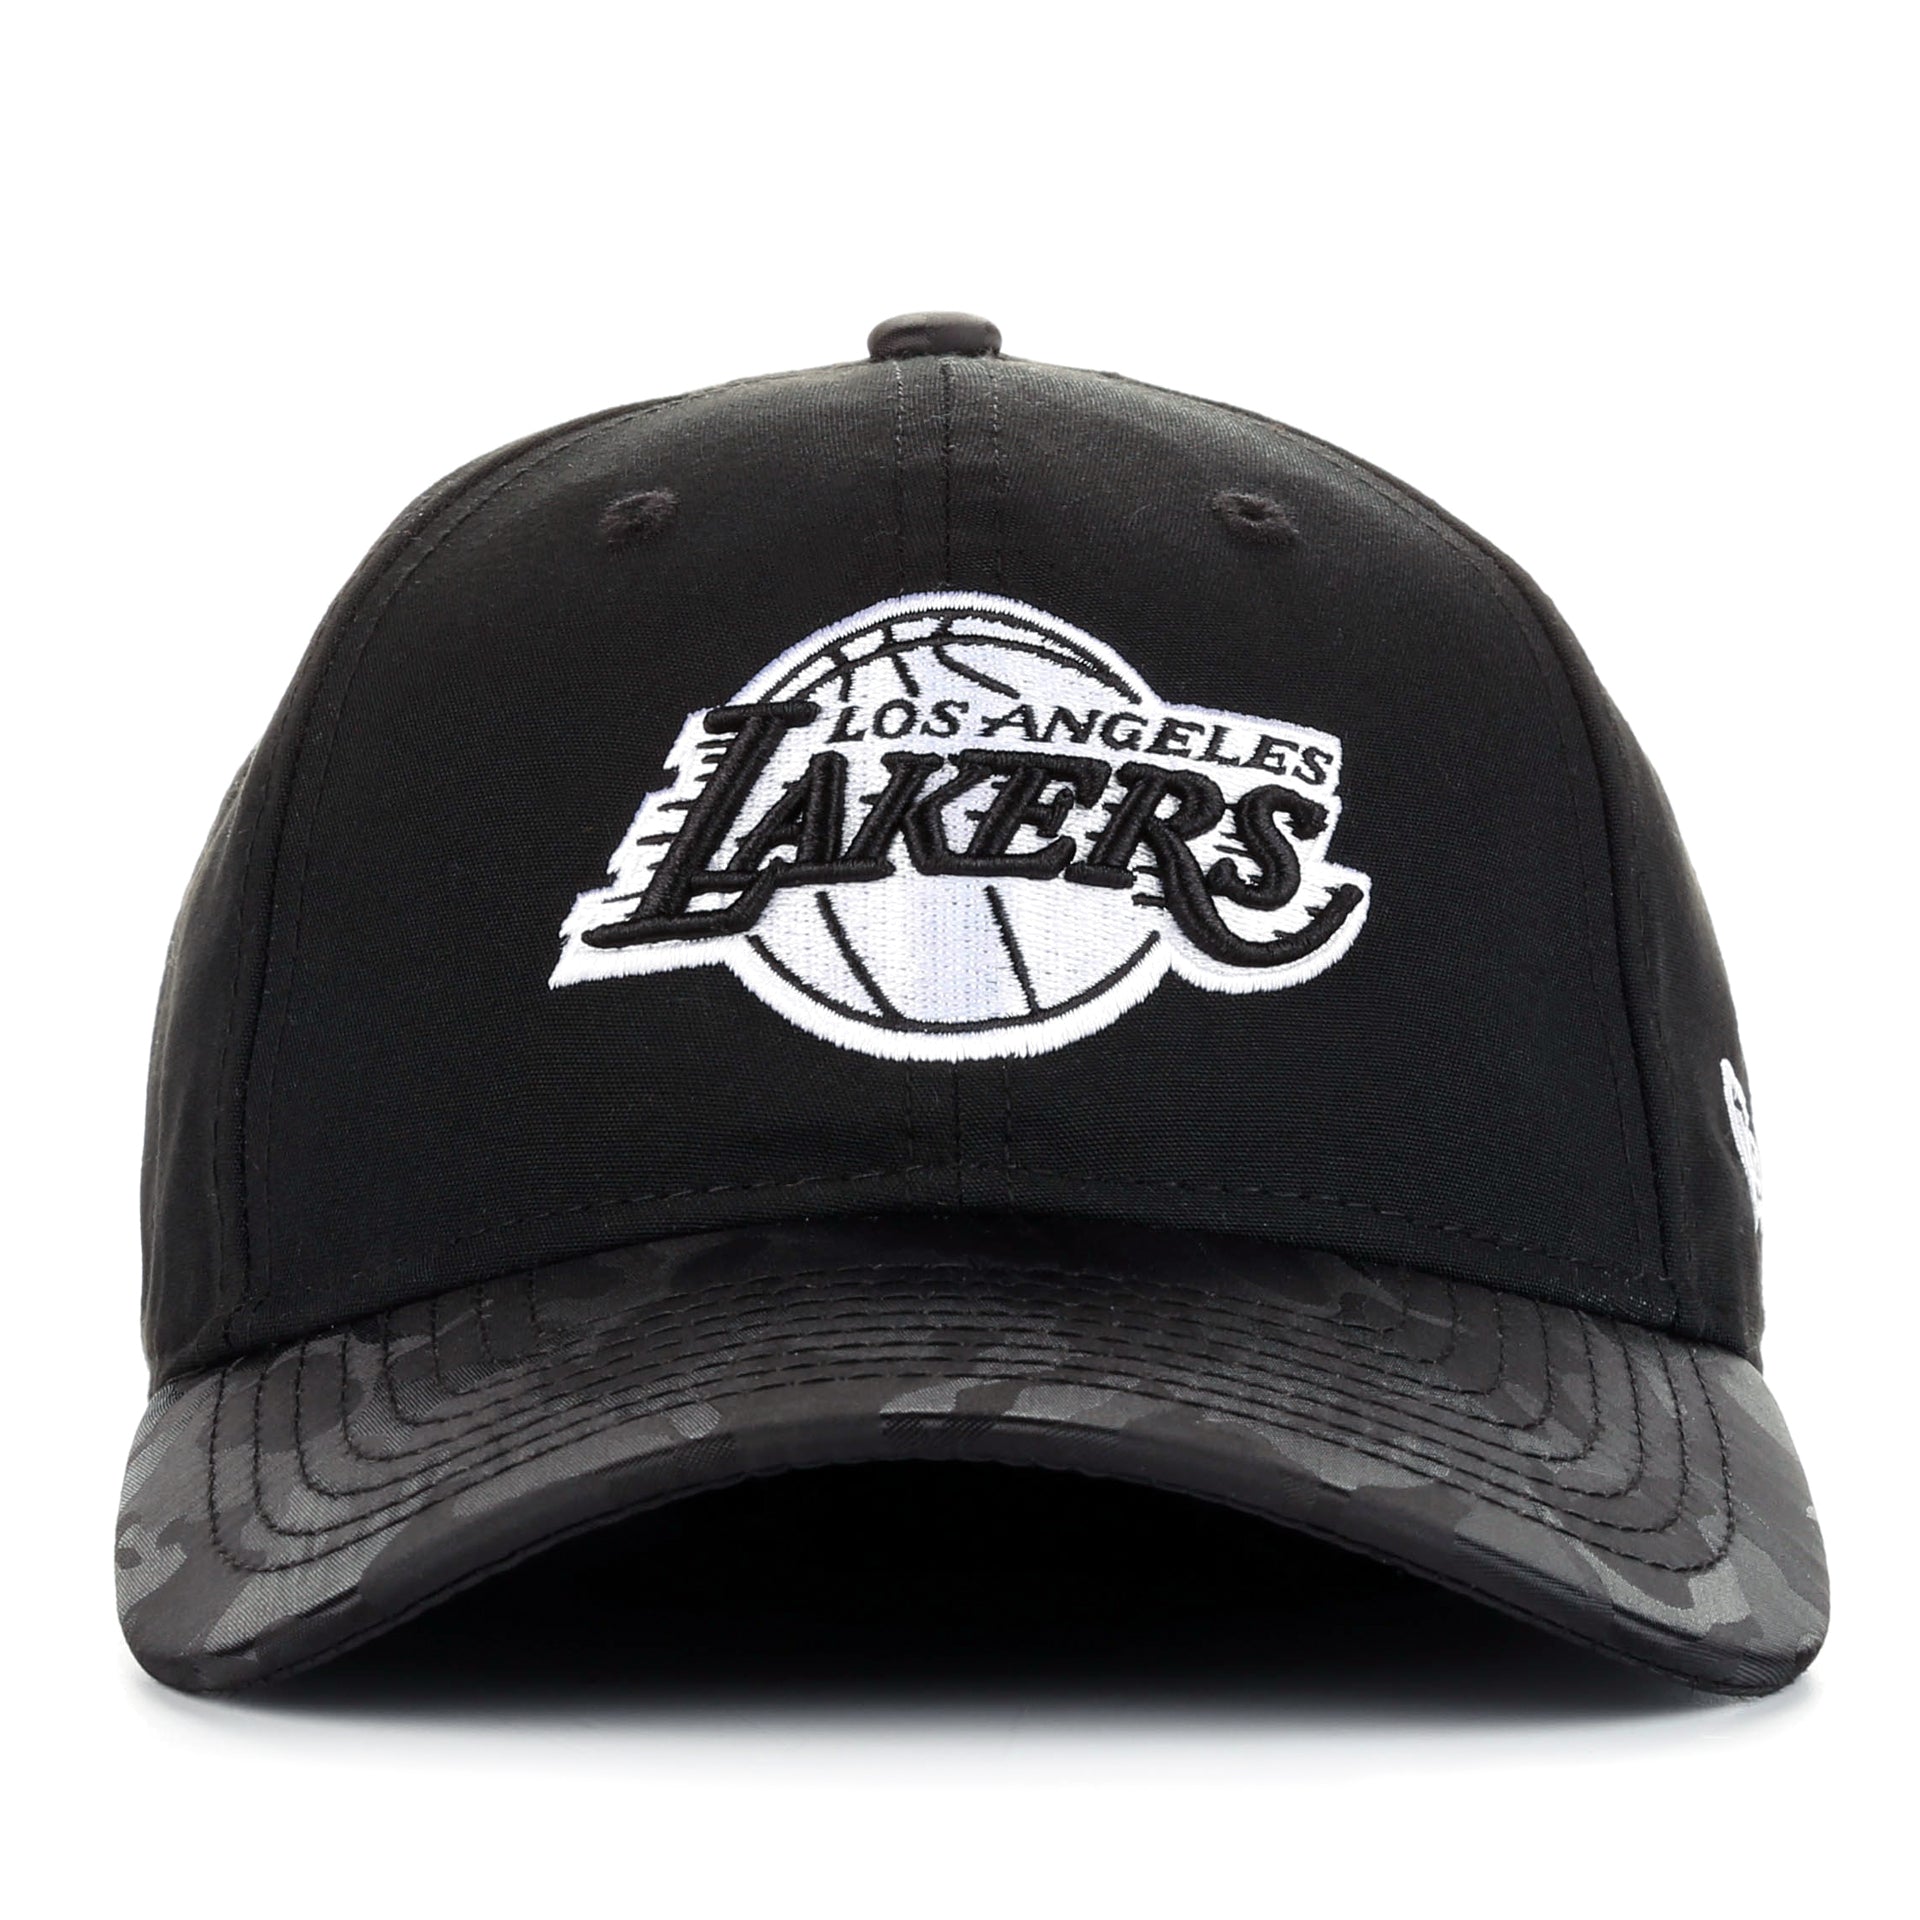 Los Angeles Lakers NBA Team Camo Snapback Hat for Sale in